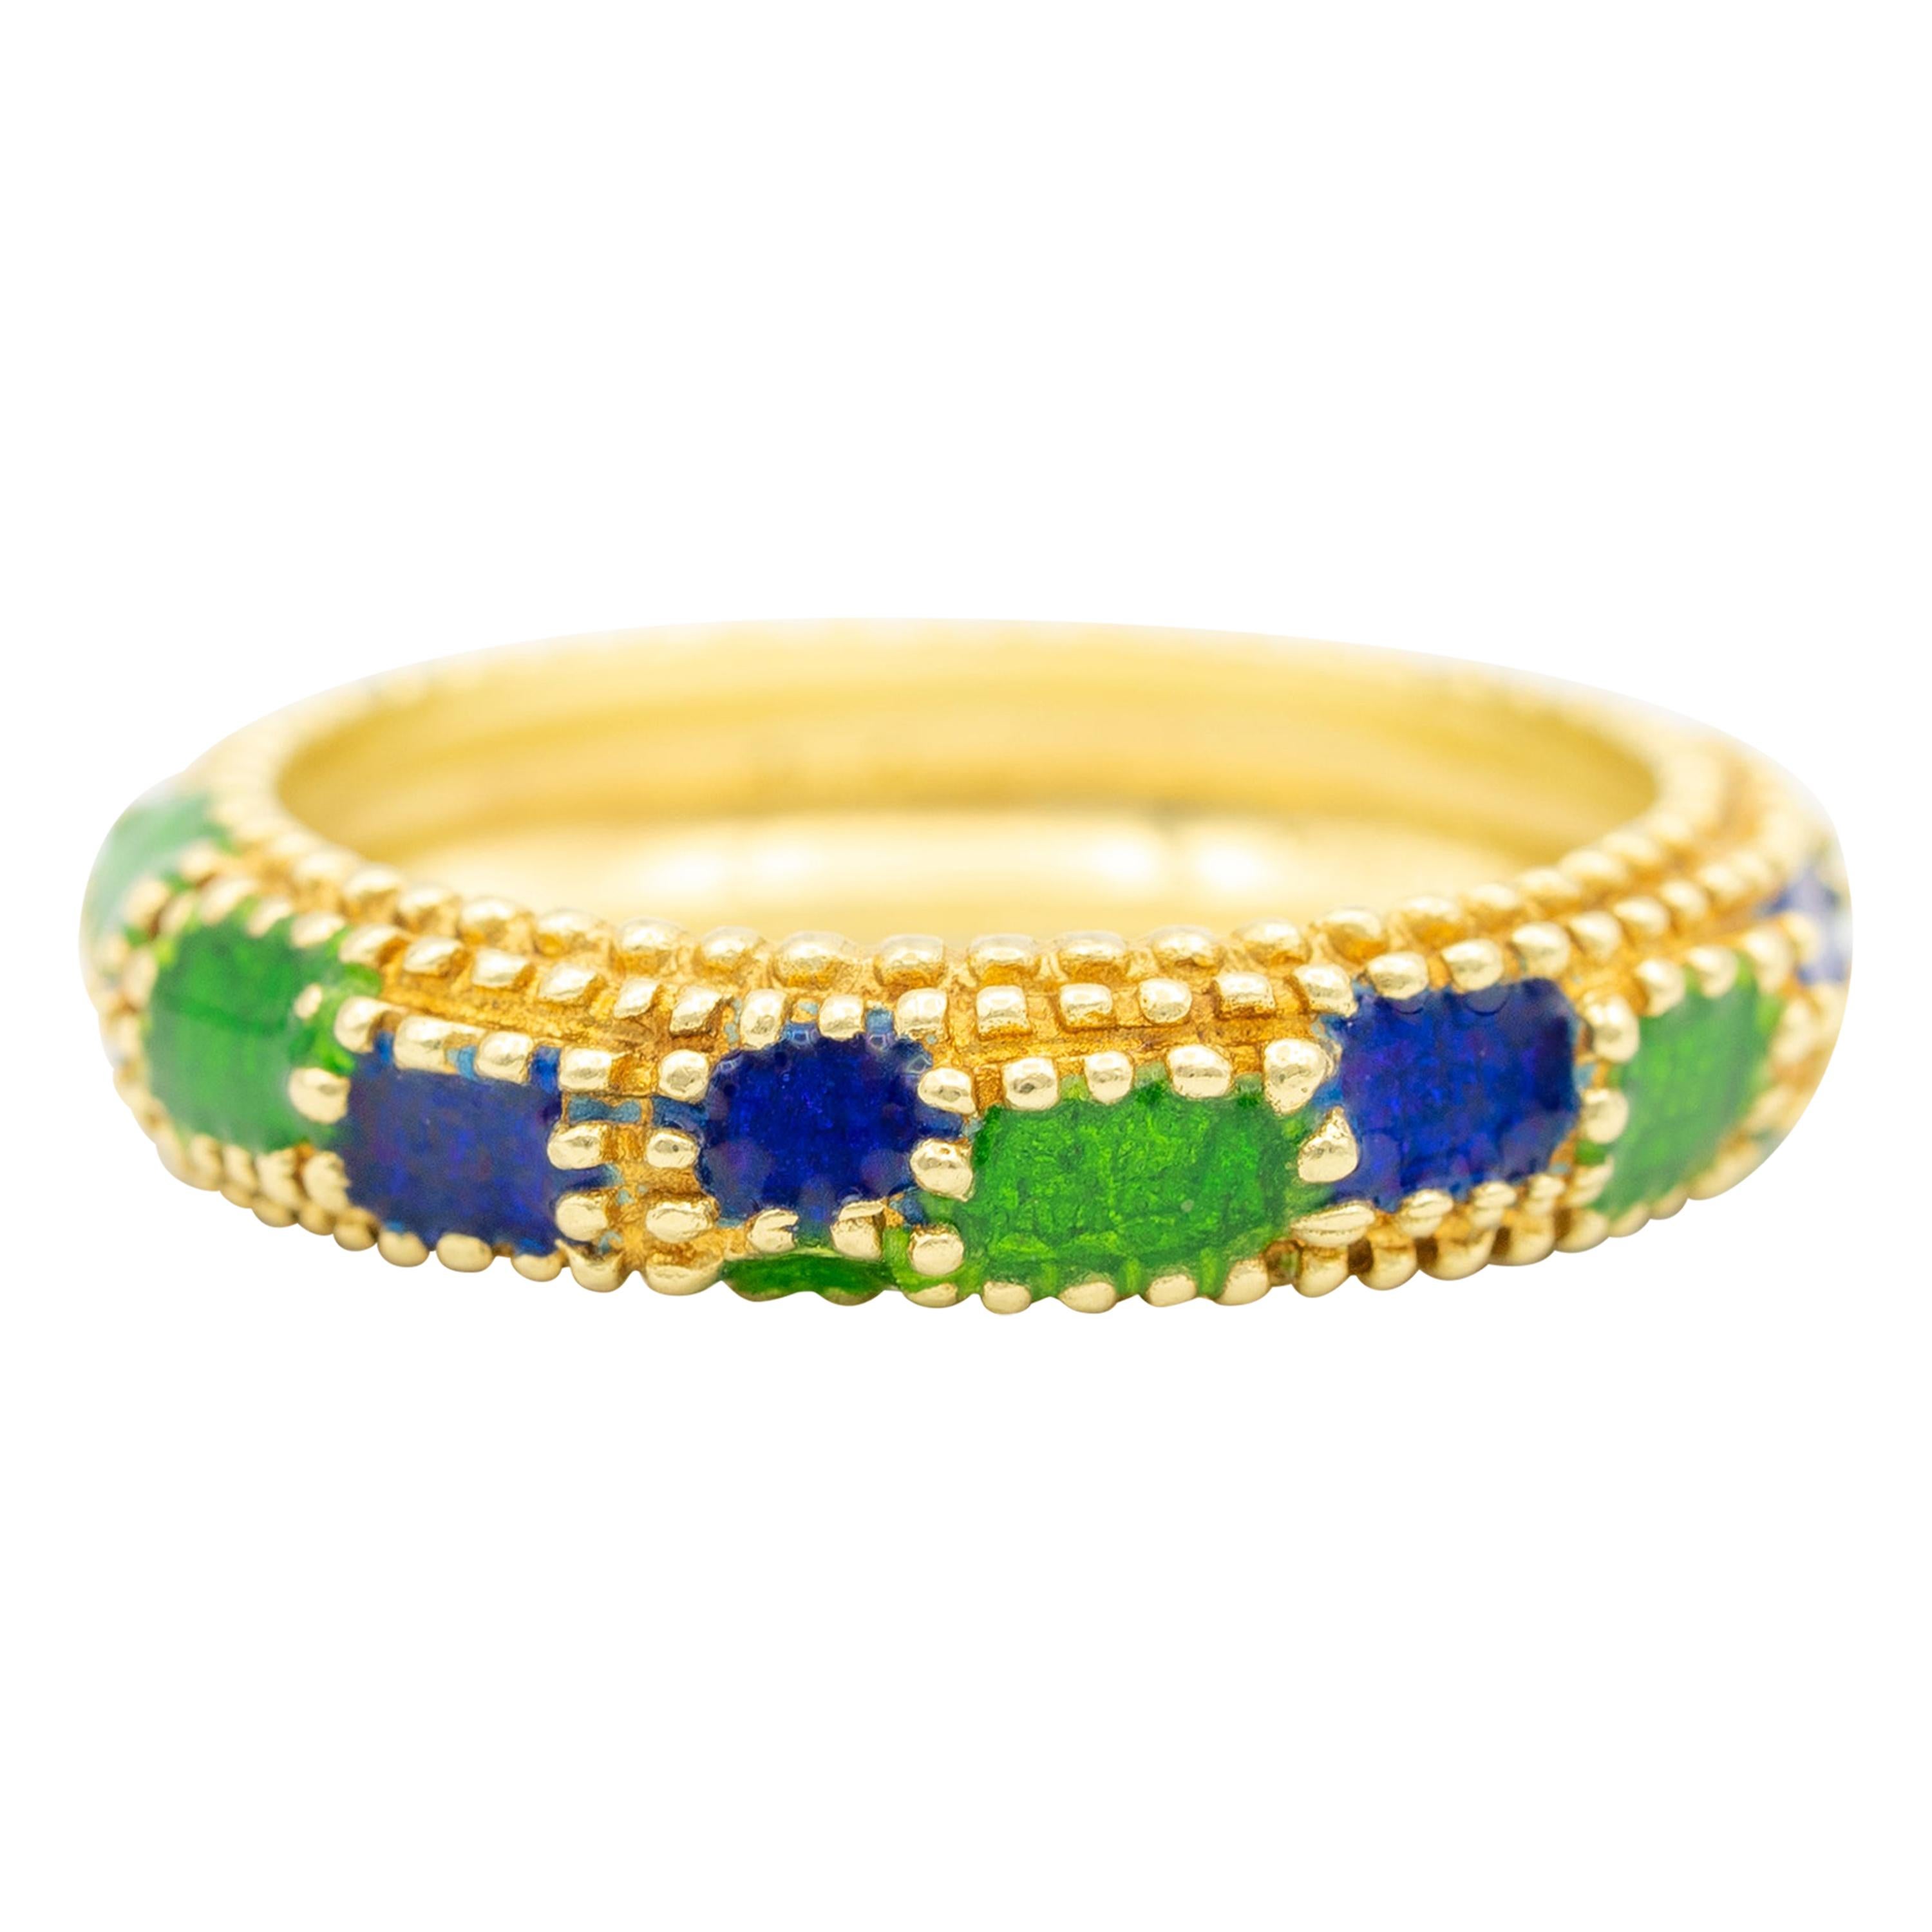 Cartier Beaded Green and Blue Enamel Ring, in 18 Karat Yellow Gold, circa 1960s